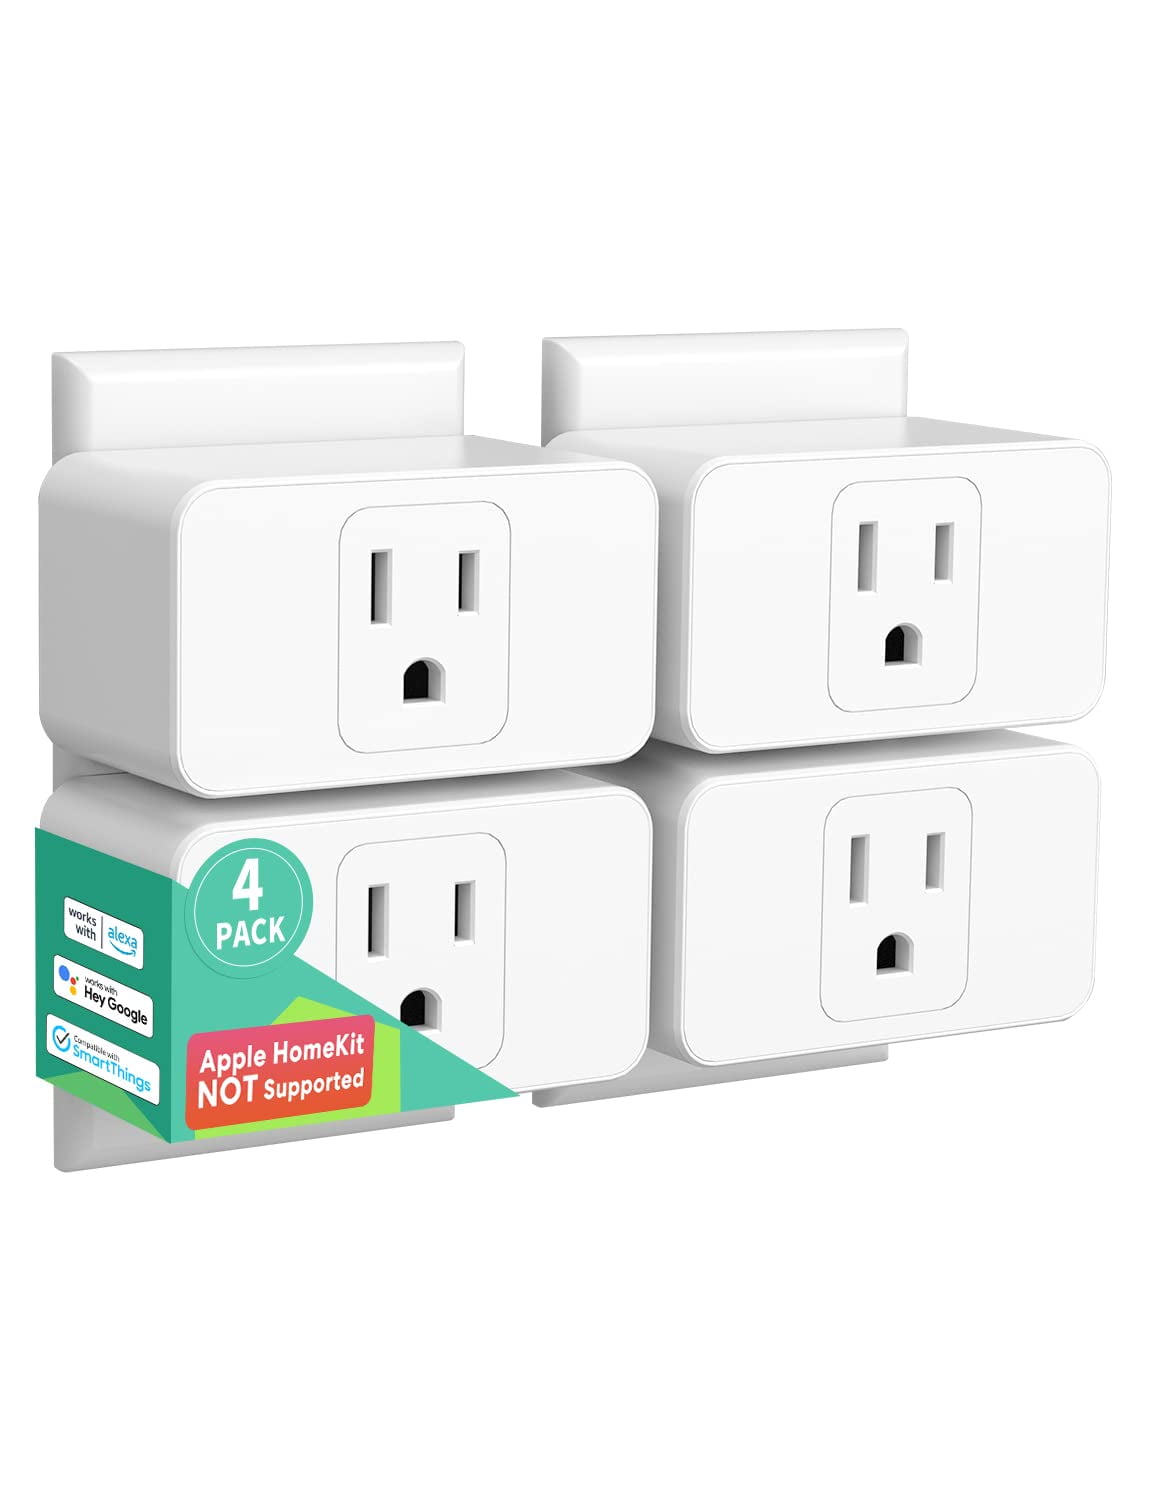 Outdoor Smart Plug, meross Outdoor Wi-Fi Outlet with 3 Sockets